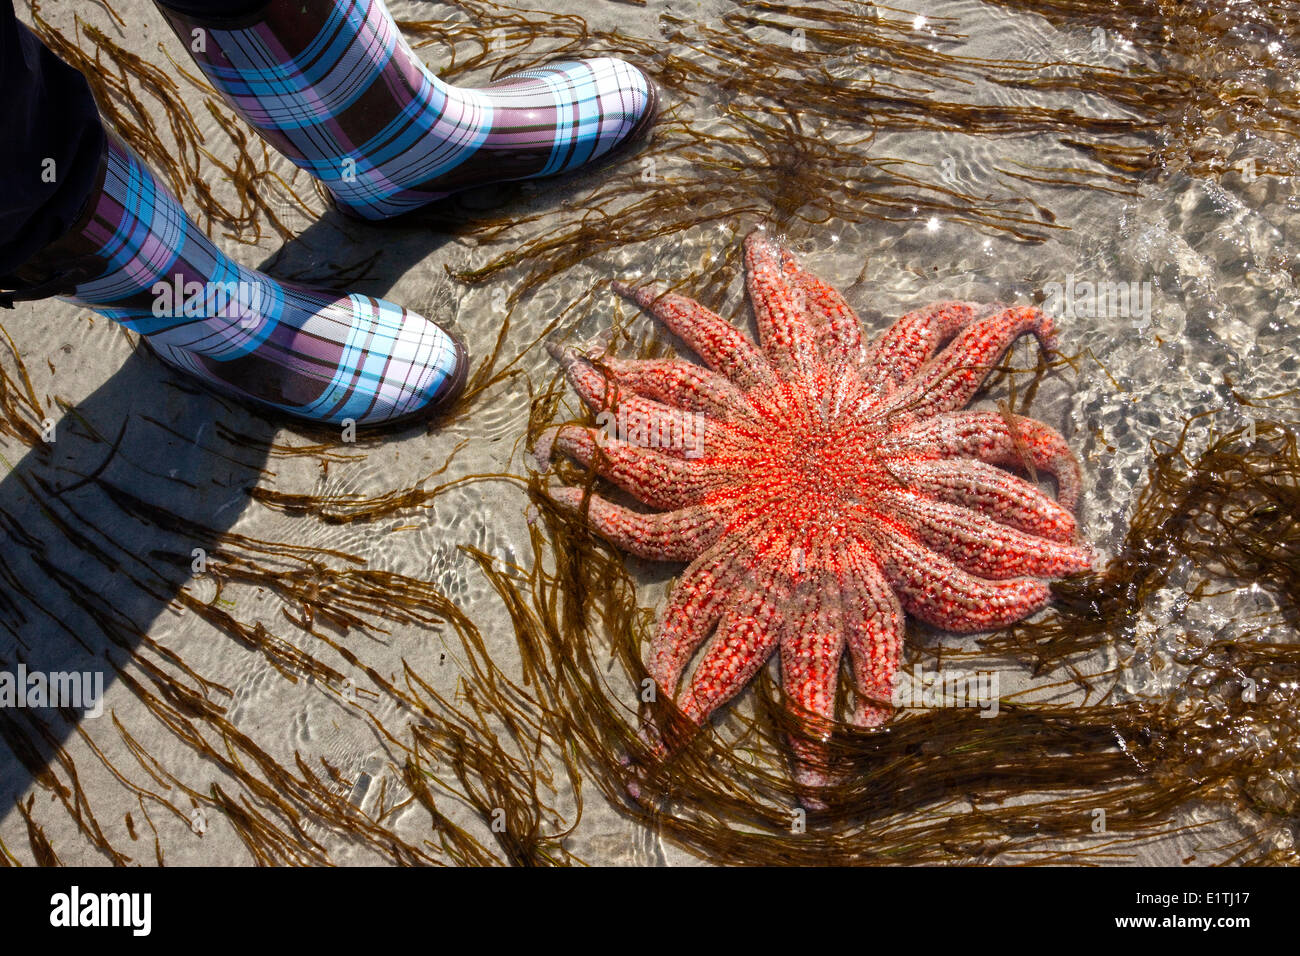 Sunflower Seastar ( Pycnopodia helianthoides ) and Boots, Klahanie Drive Beach, Low Tide, Sliammon First Nations Lands, Powell R Stock Photo